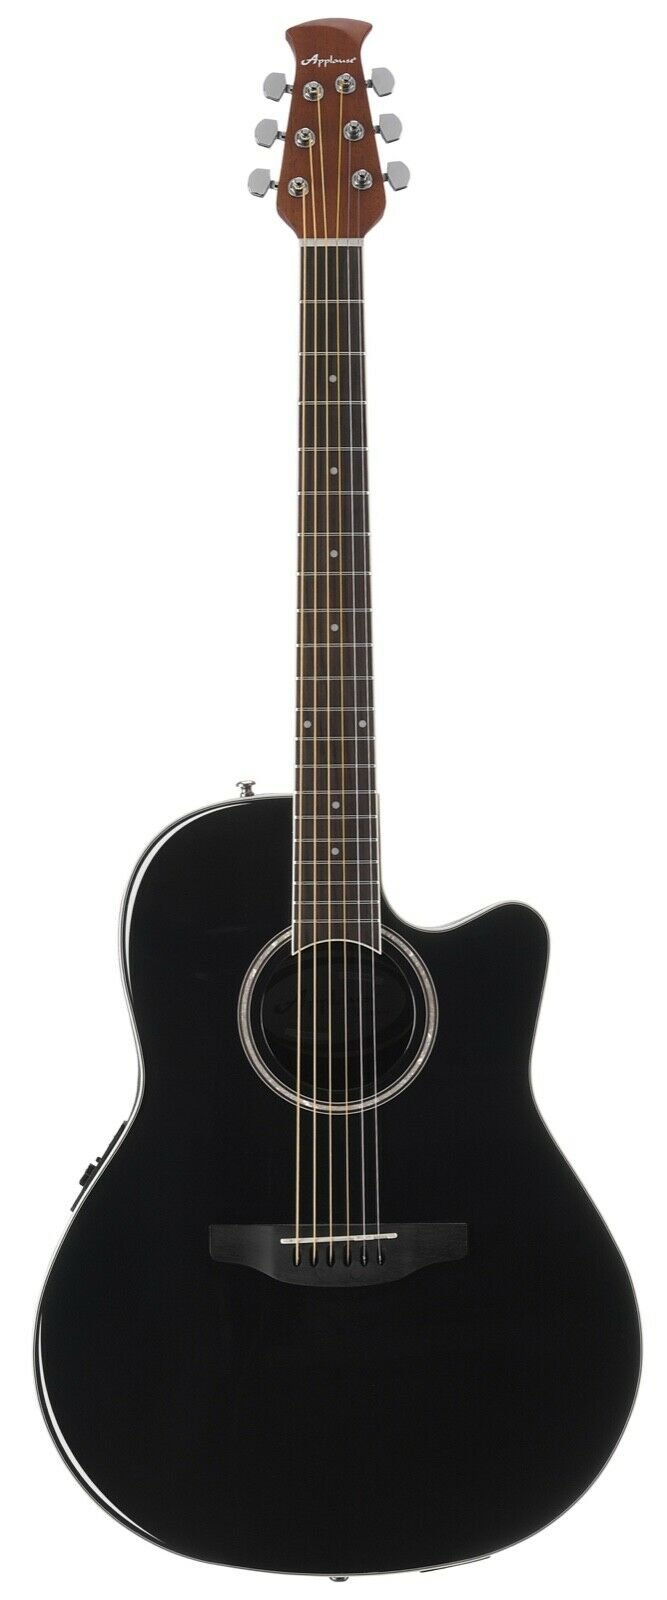 Ovation Applause Standard Acoustic Electric Guitar - Black